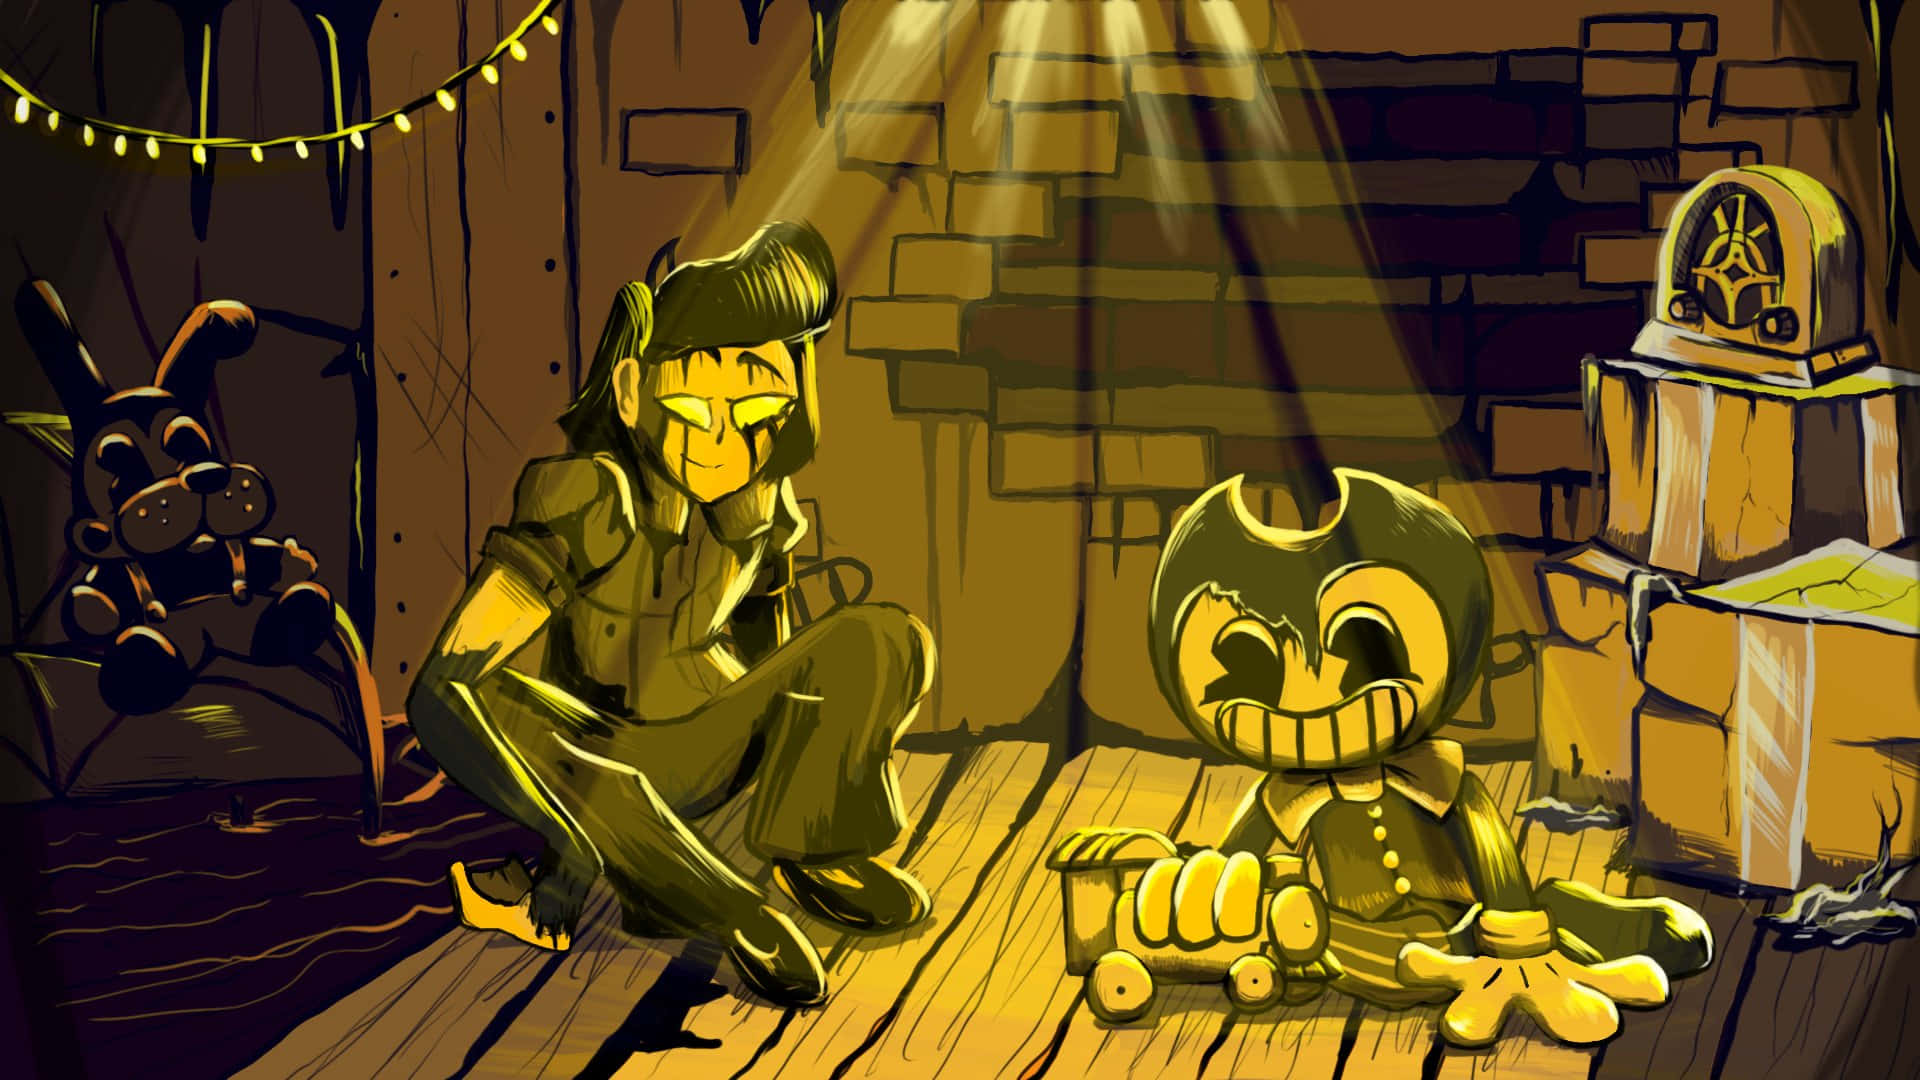 Enter the world of Bendy and the Ink Machine